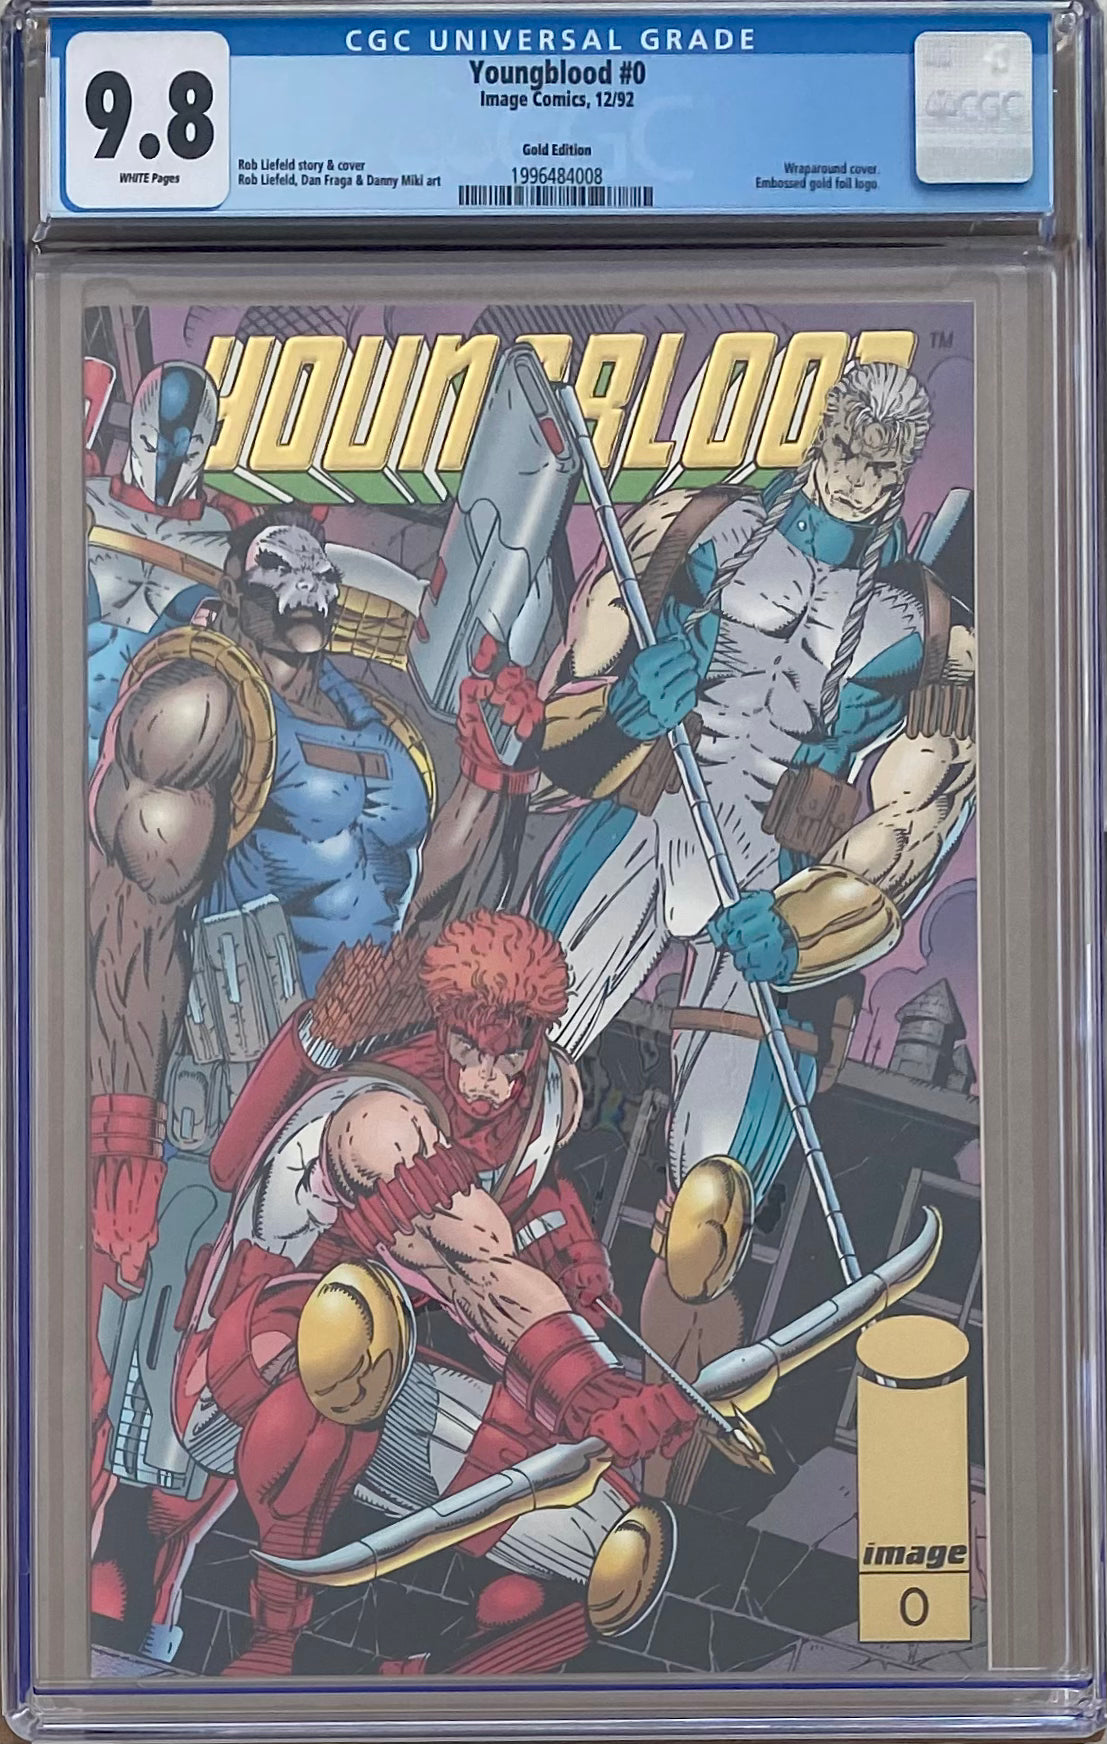 Youngblood #0 Gold Edition CGC 9.8